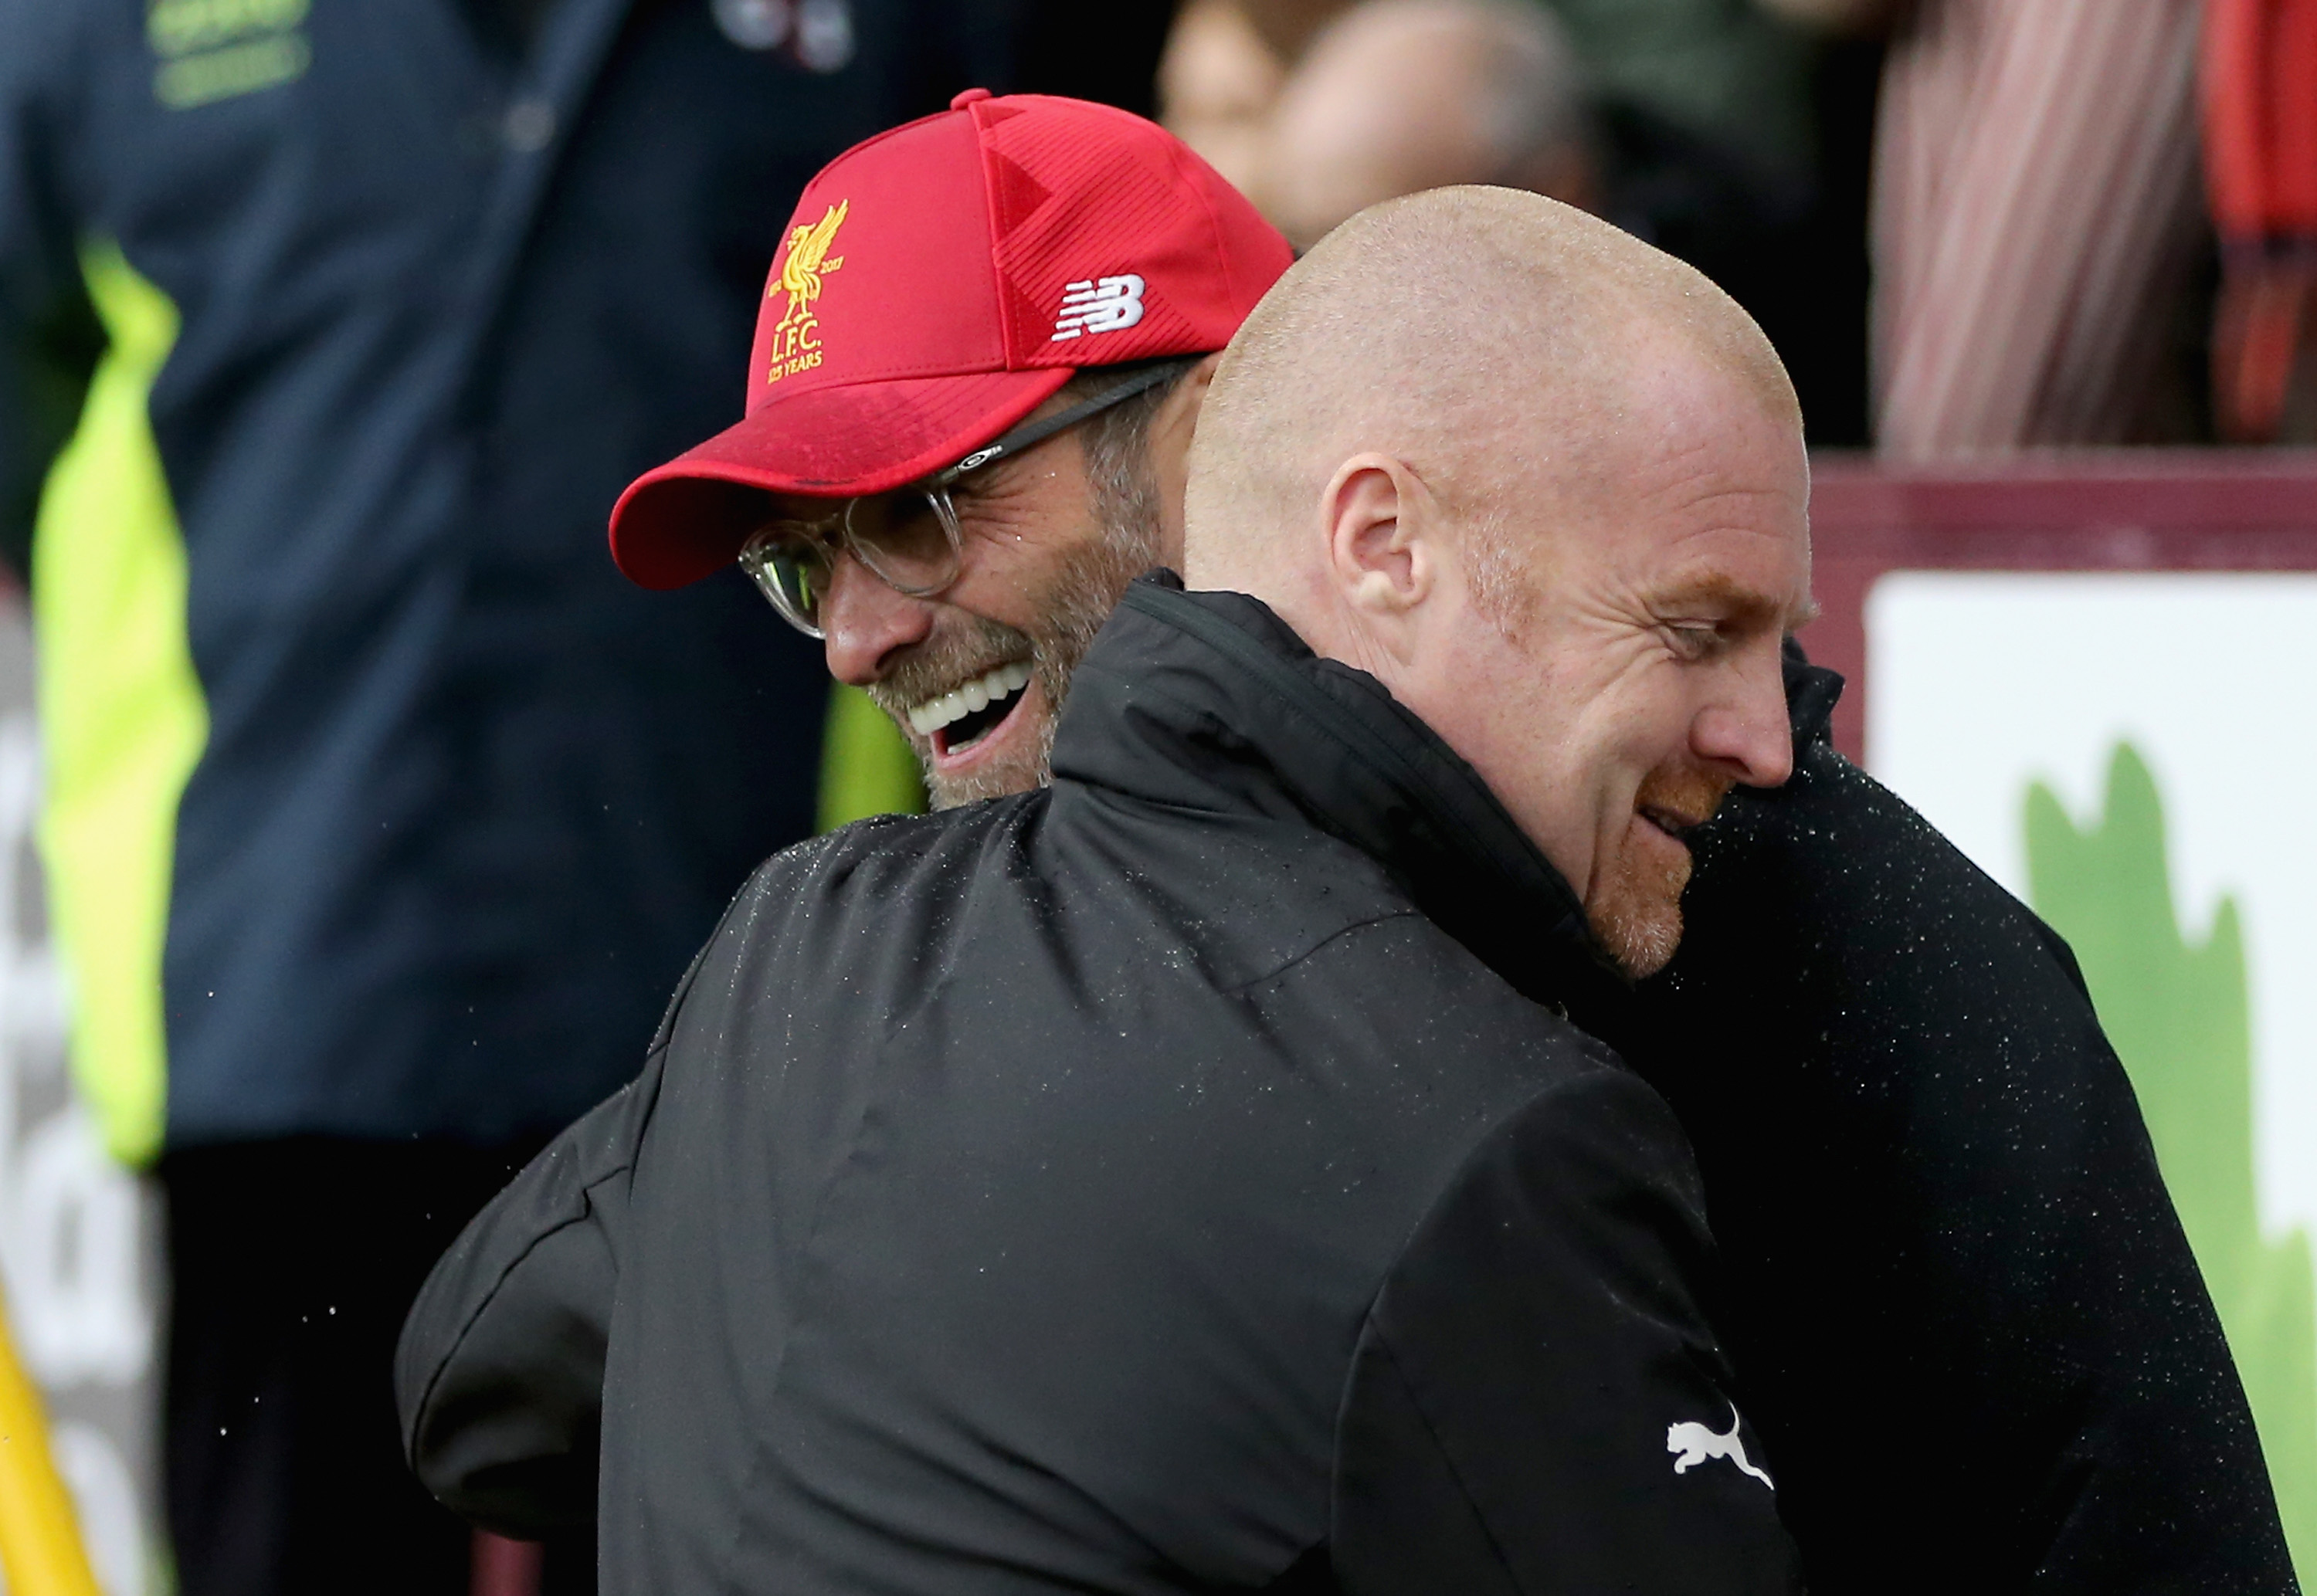 BURNLEY, ENGLAND - JANUARY 01:  Sean Dyche, Manager of Burnley and Jurgen Klopp, Manager of Liverpool embrace prior to the Premier League match between Burnley and Liverpool at Turf Moor on January 1, 2018 in Burnley, England.  (Photo by Nigel Roddis/Getty Images)